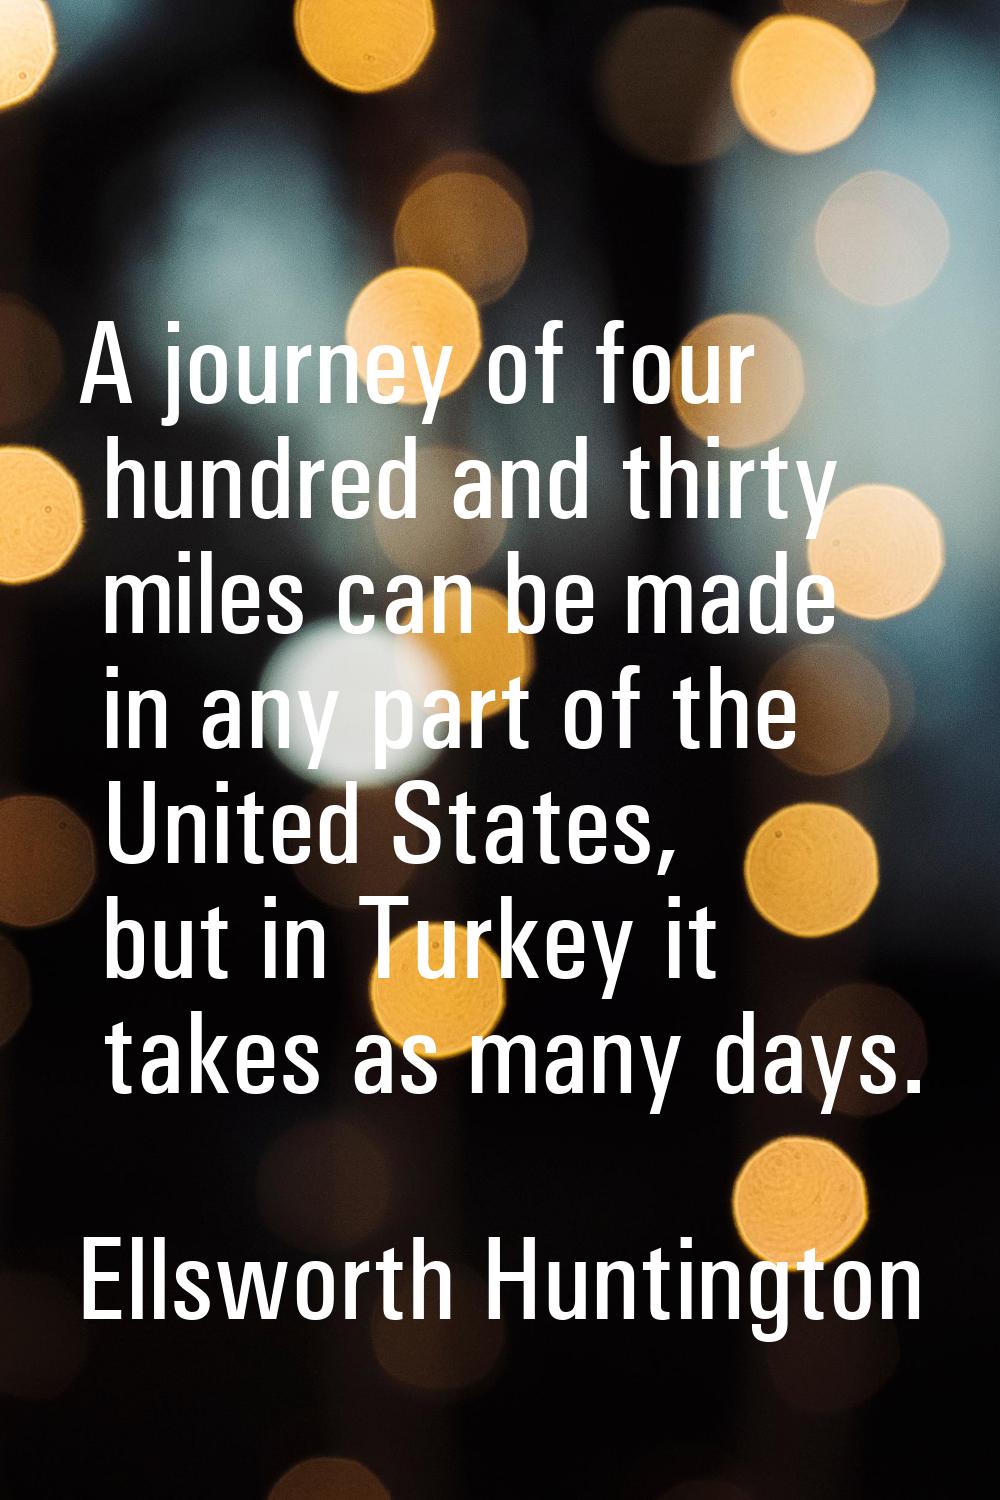 A journey of four hundred and thirty miles can be made in any part of the United States, but in Tur